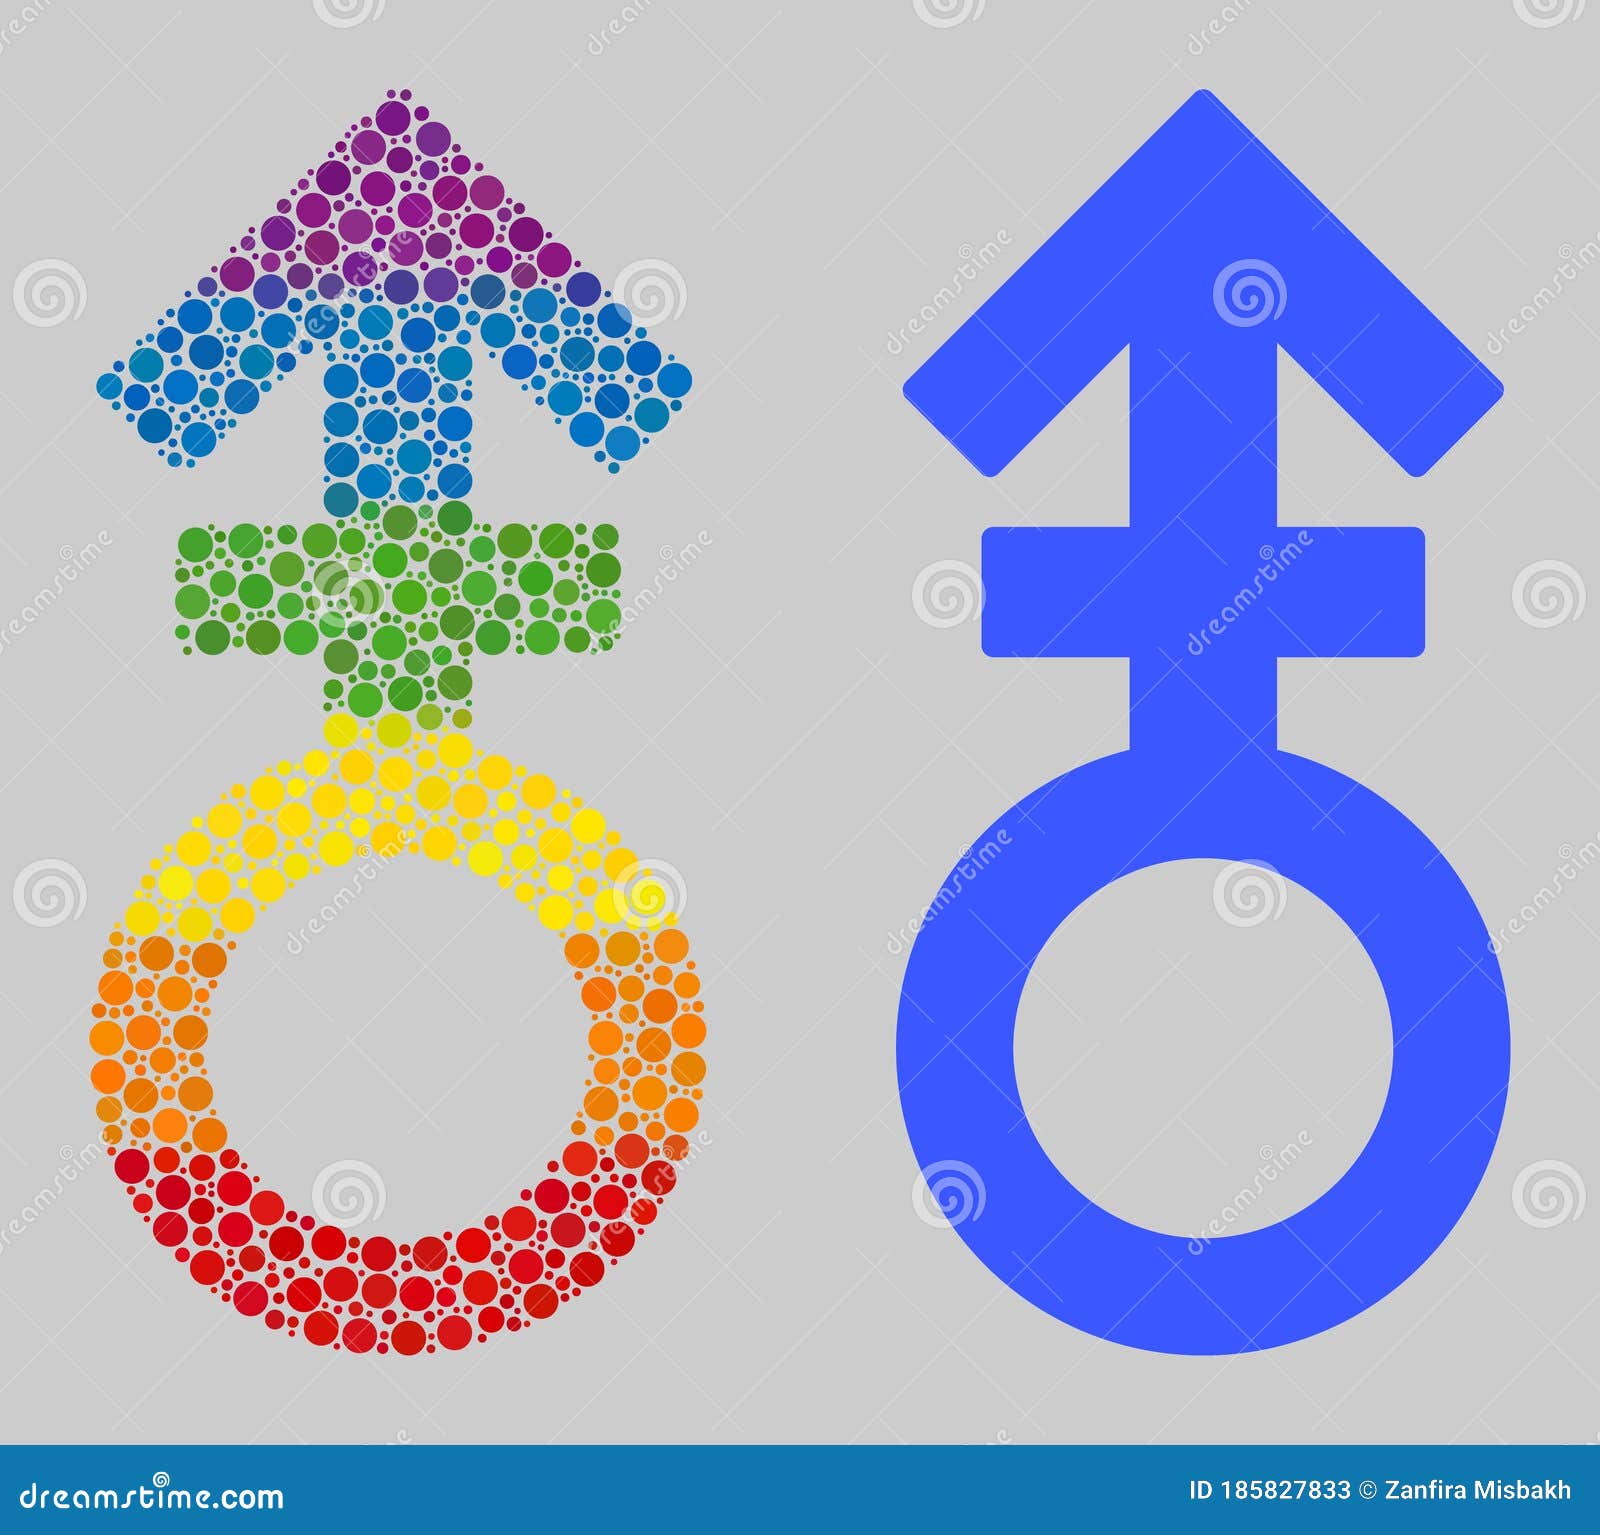 Rainbow Third Gender Symbol Composition Icon Of Round Dots Stock Vector 